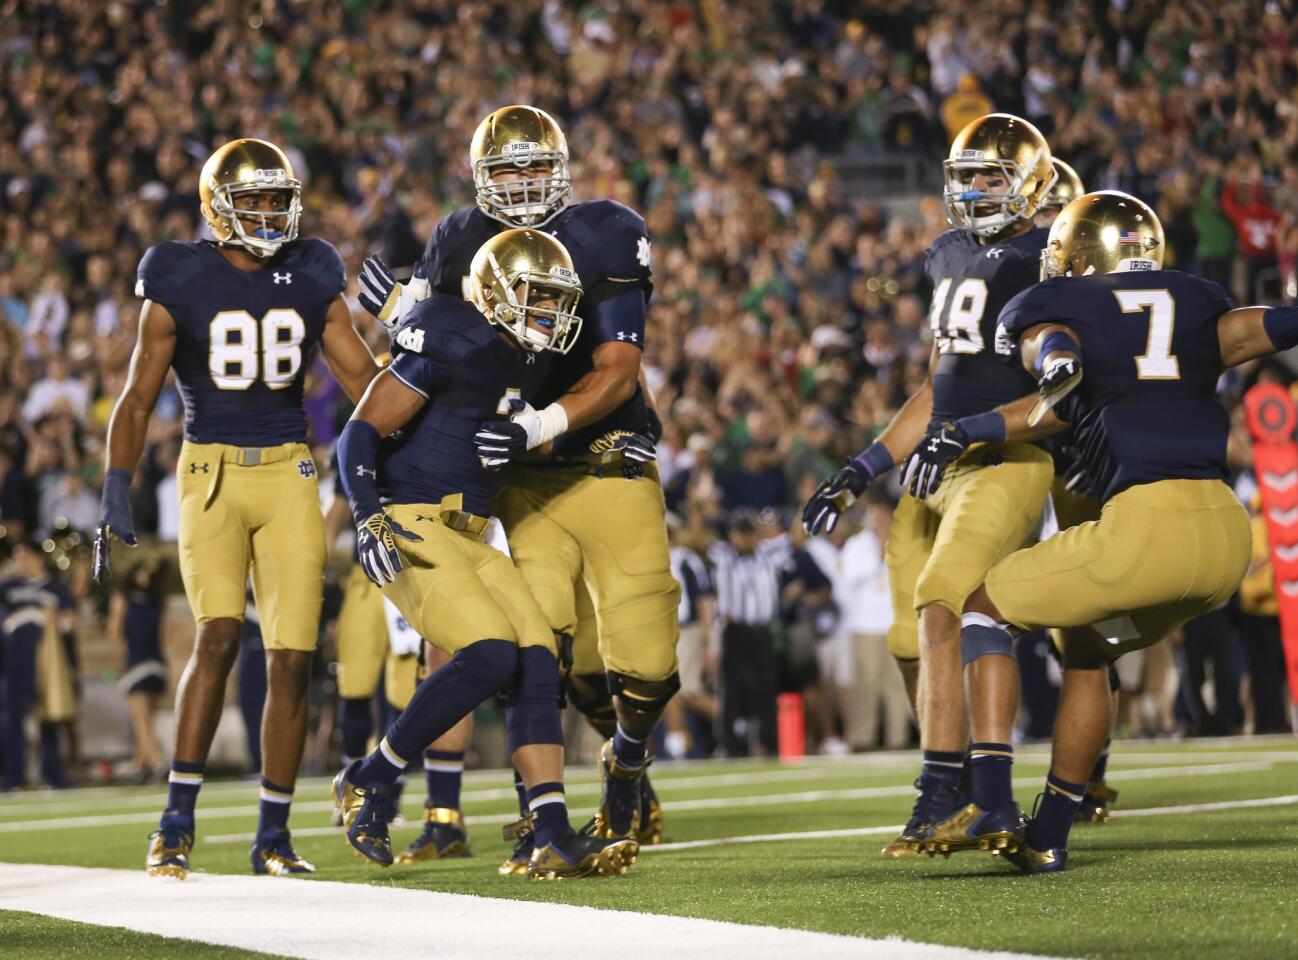 Notre Dame wide receiver Amir Carlisle (3) celebrates with teammates after his touchdown during the second half.